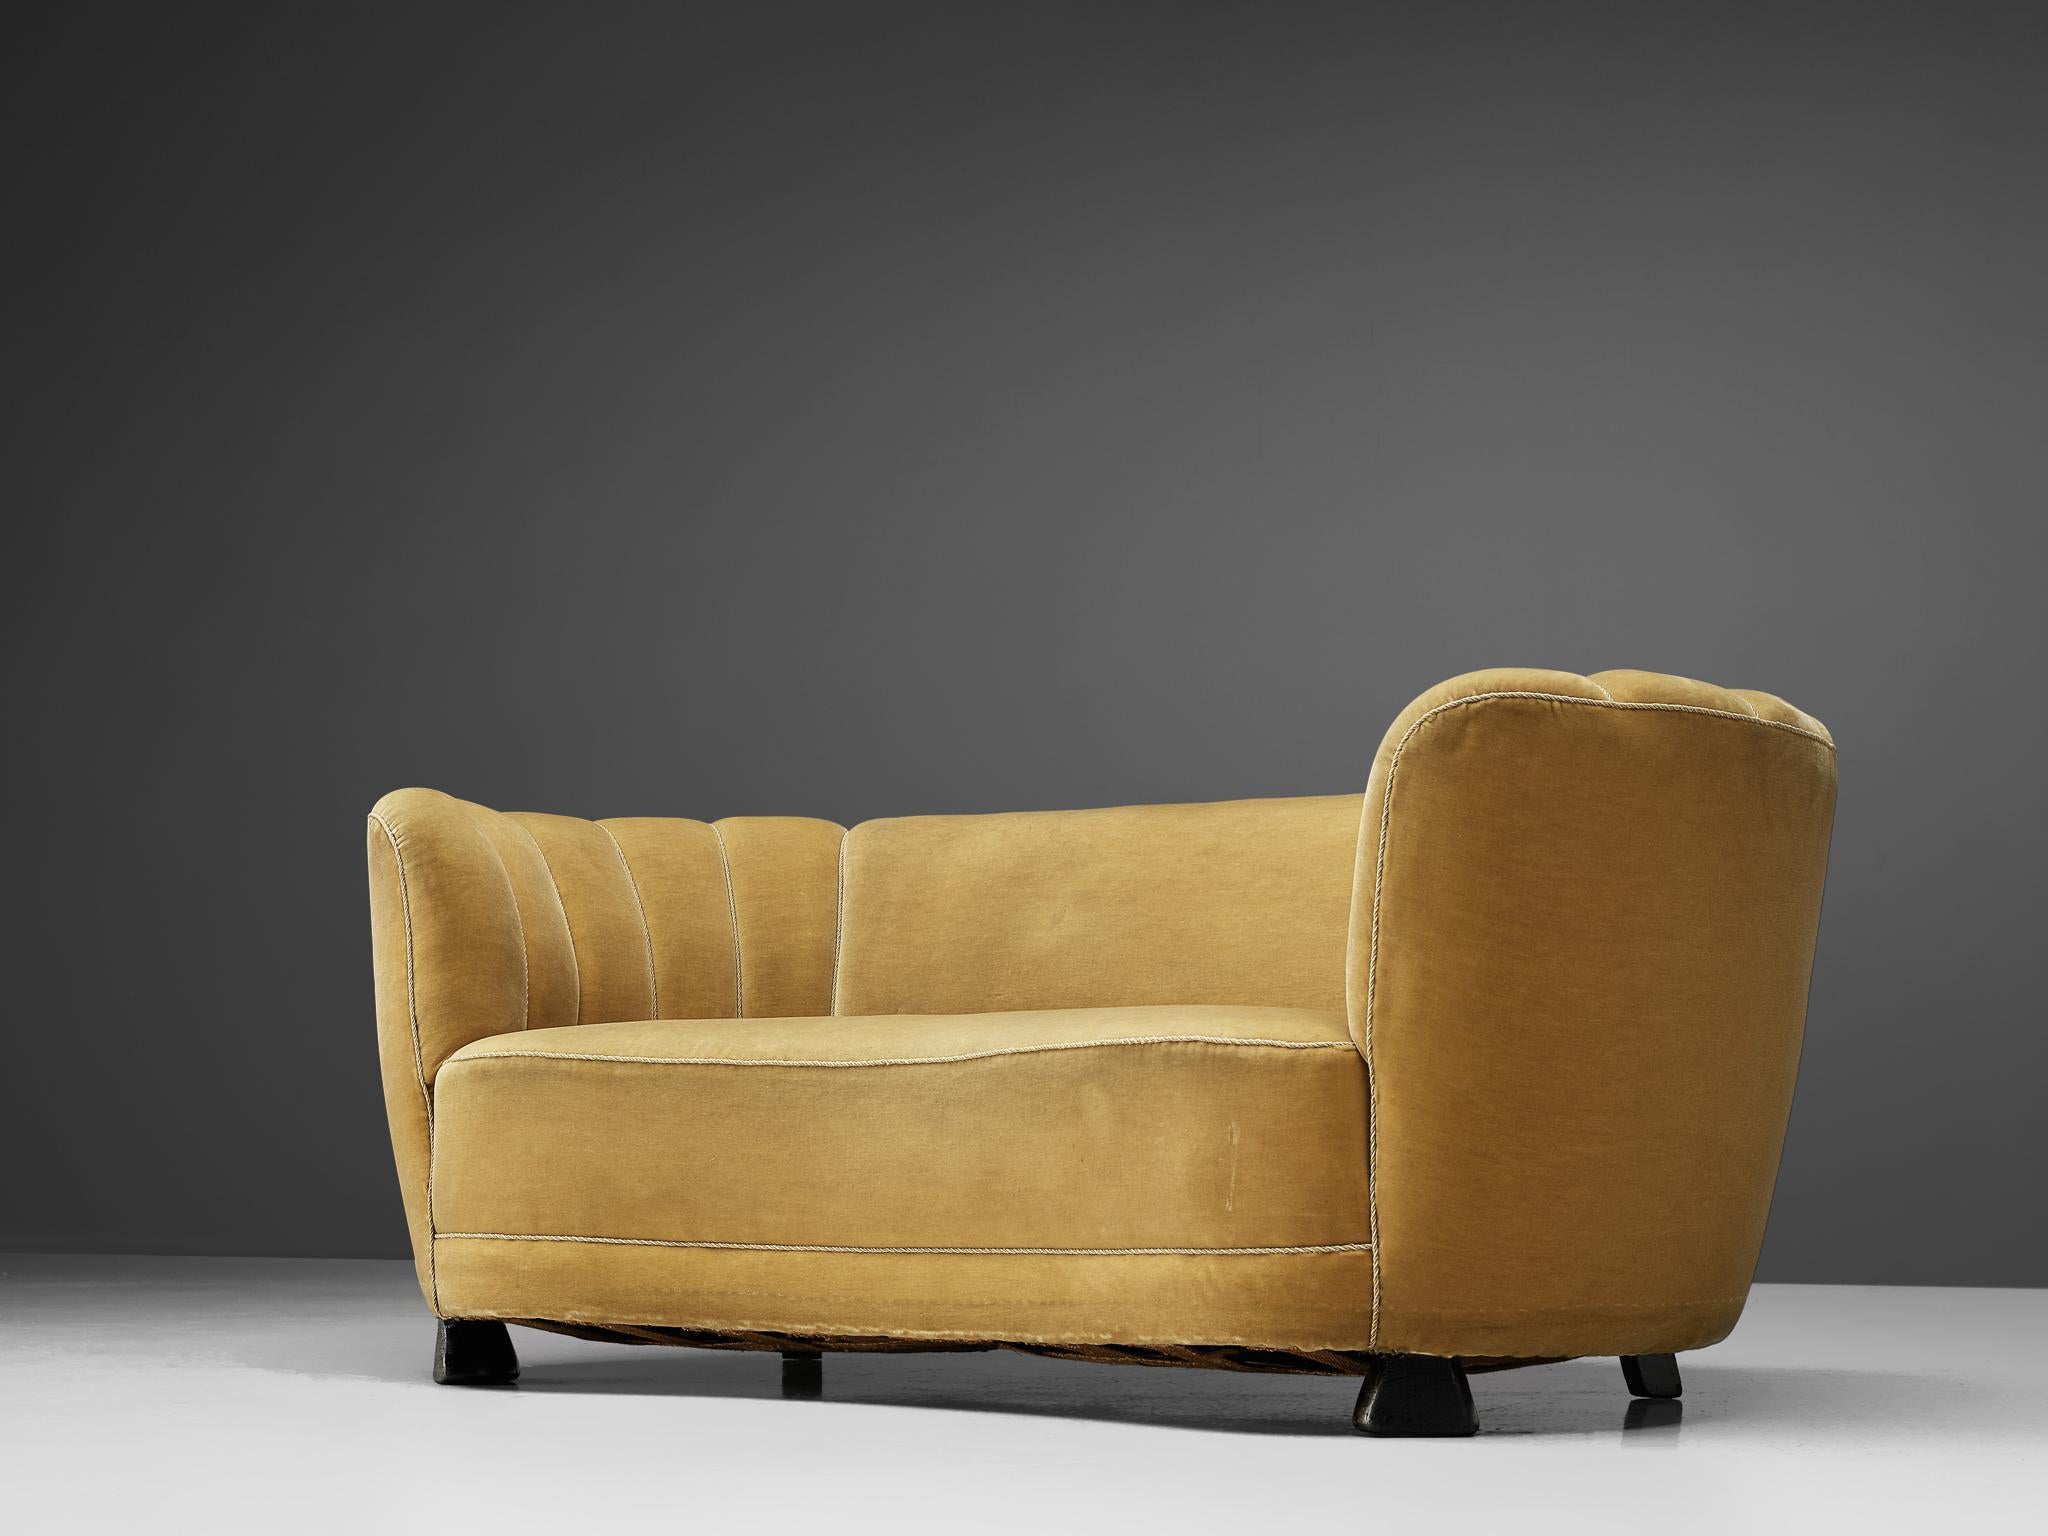 Banana sofa, mustard yellow velour upholstery and oak, Denmark, 1940s.

This voluptuous sofa is executed with a mustard yellow velour upholstery. The sofa has a high lined and curved back, while the backrest is horizontal straight and flows over